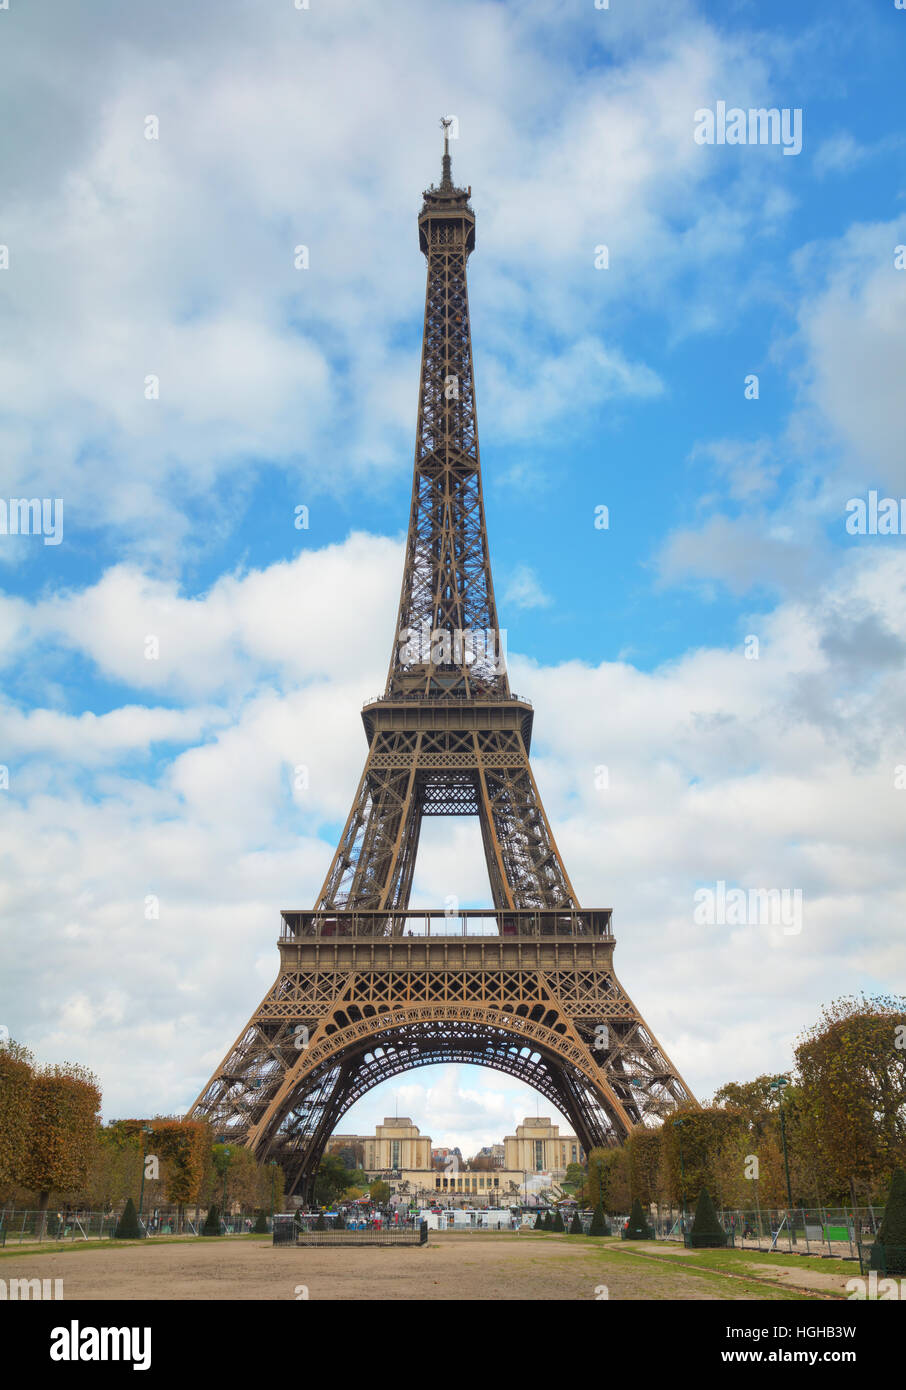 Cityscape of Paris with the Eiffel tower on a sunny day Stock Photo